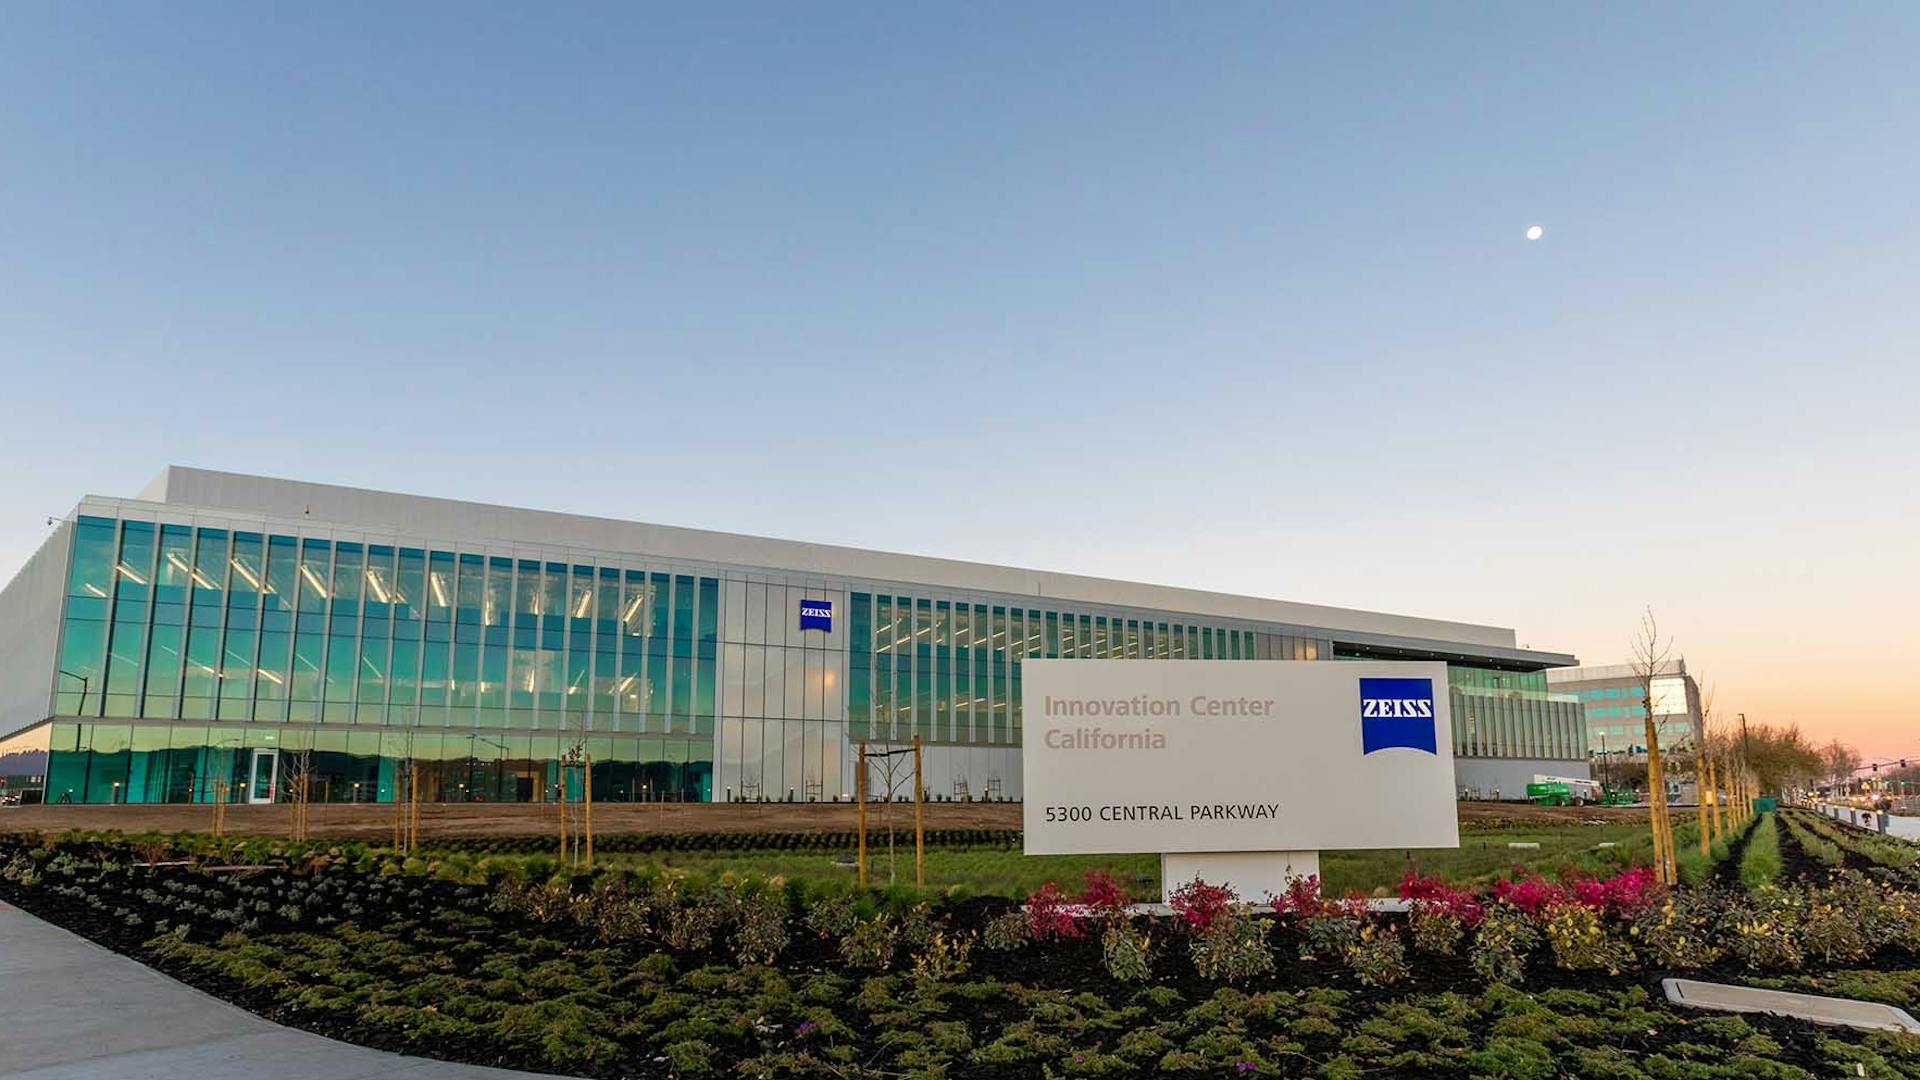 The Bay Area-based new ZEISS Innovation Center is designed to promote customer, science and employee collaborations.